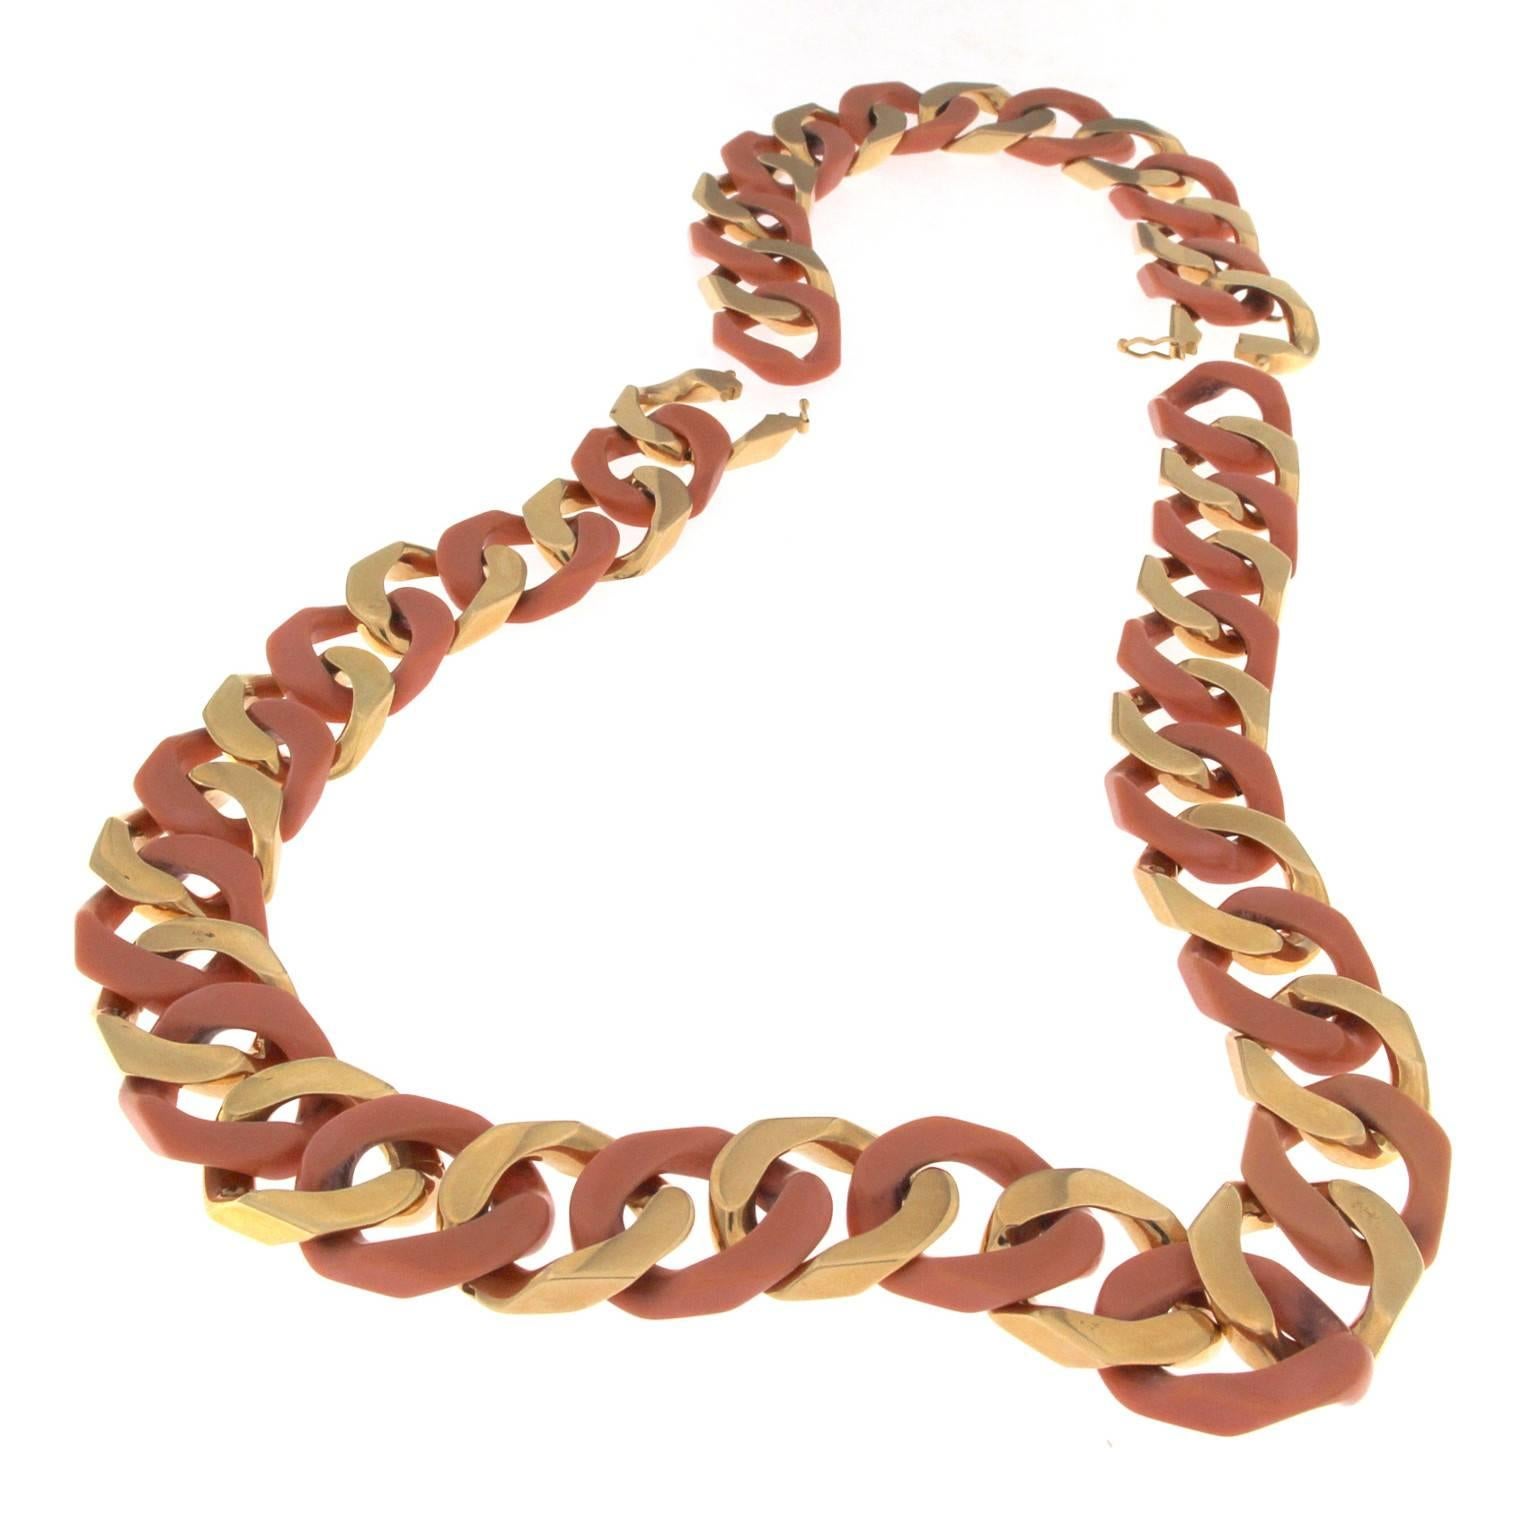 Women's Parure Necklace and Bracelet in Coral and Pink Gold Chain